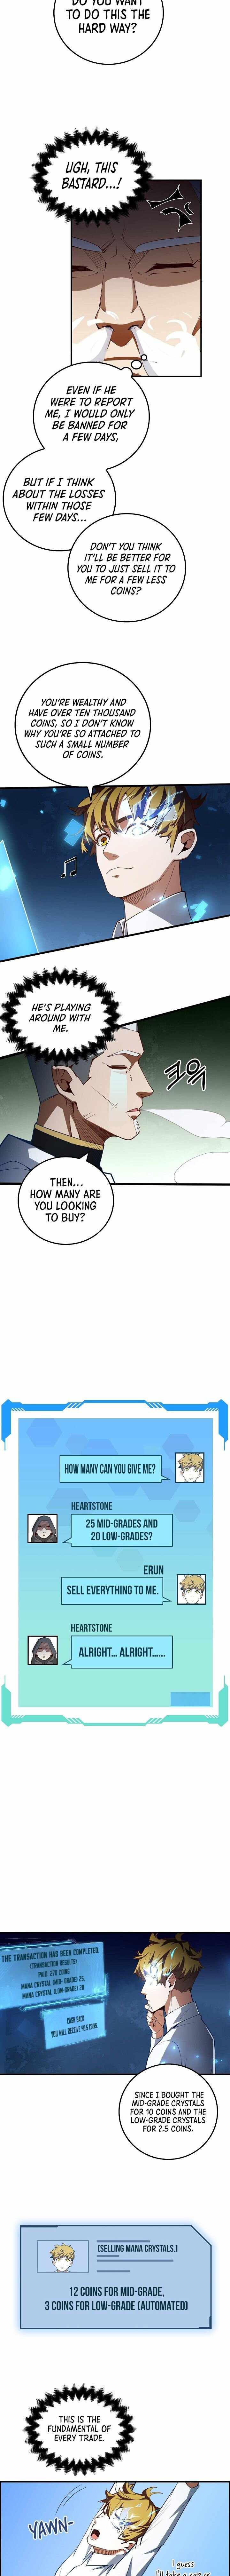 The Lords Coins Arent Decreasing Chapter 6 Page 2